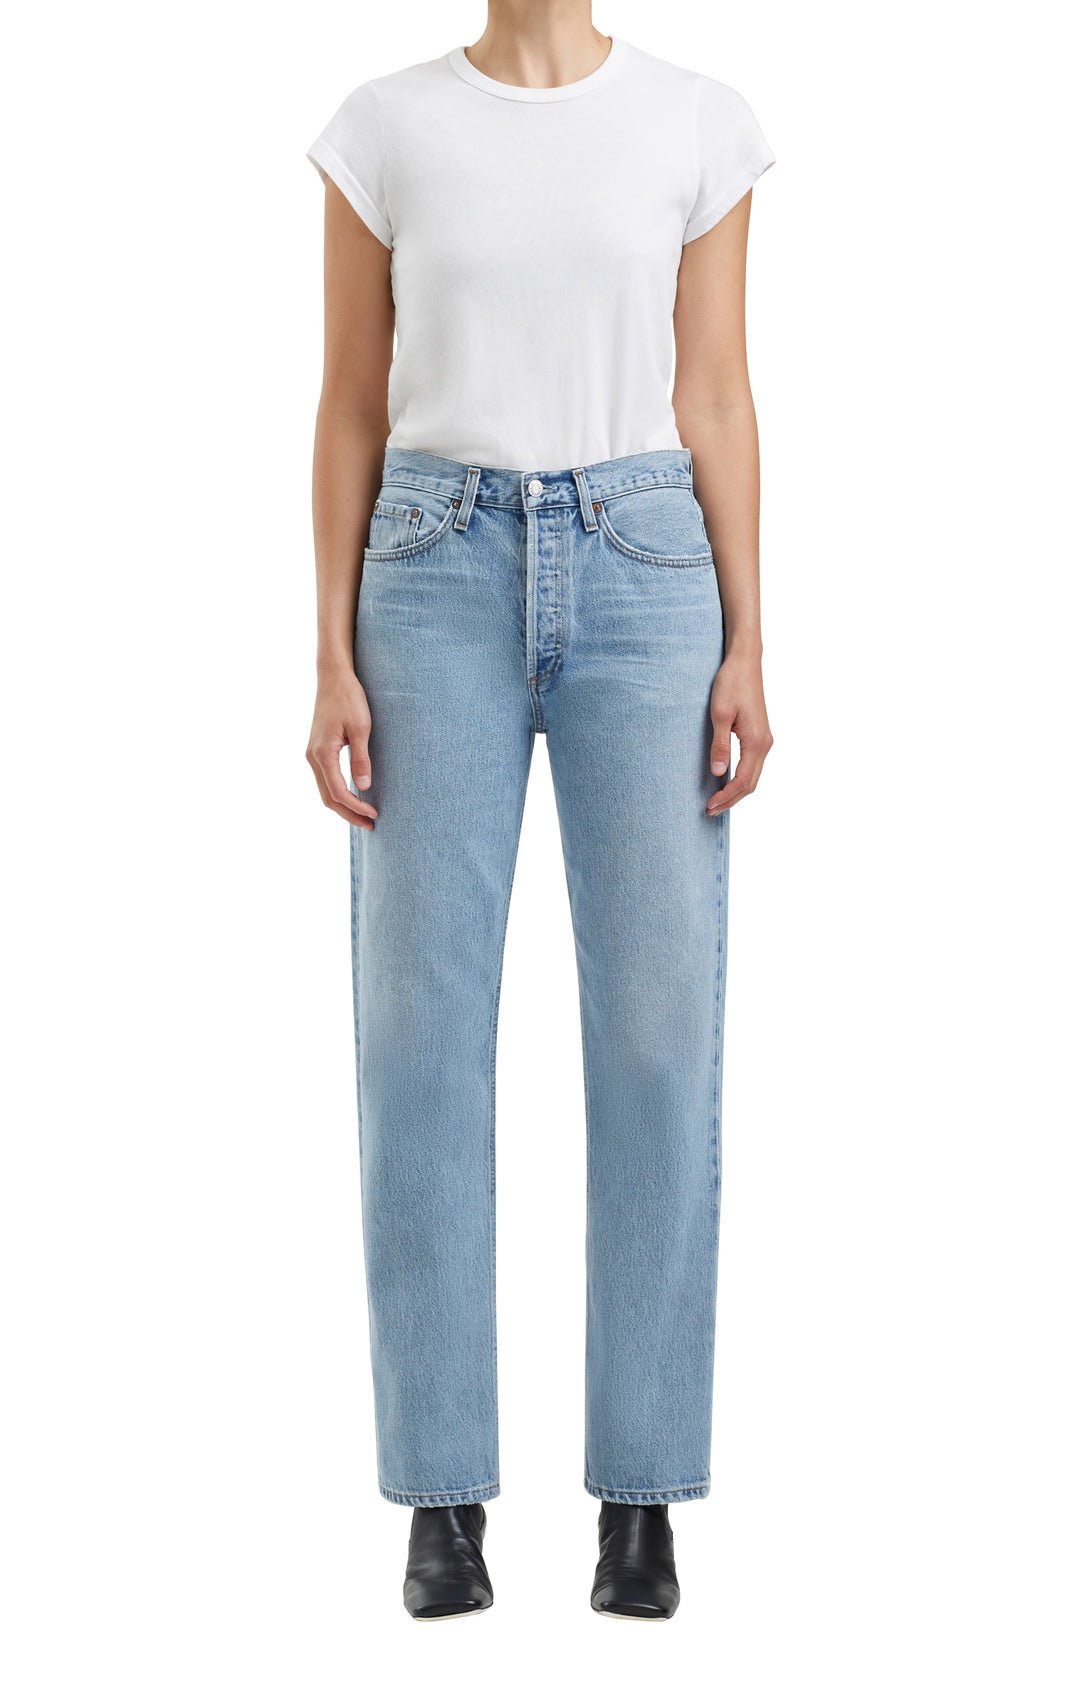 AGoldE - Lana Mid-Rise Full Length Jeans in Fiction